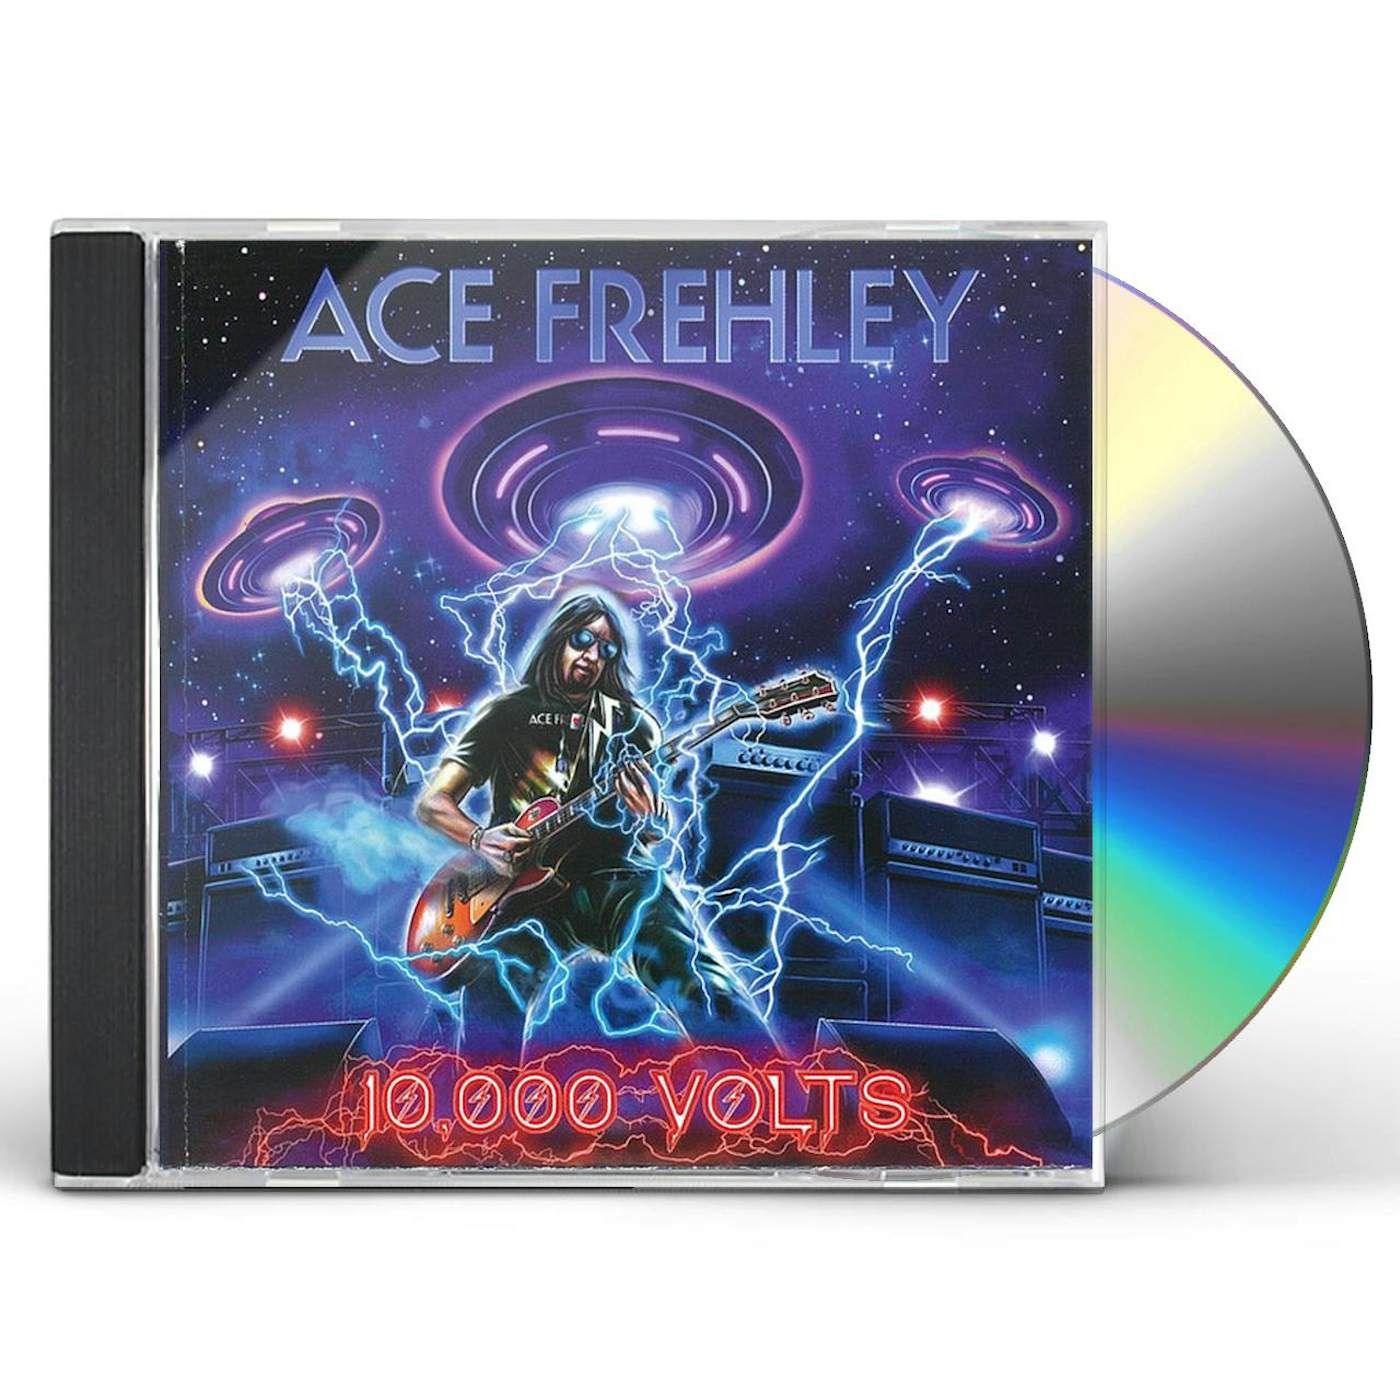 Ace Frehley 10,000 VOLTS CD